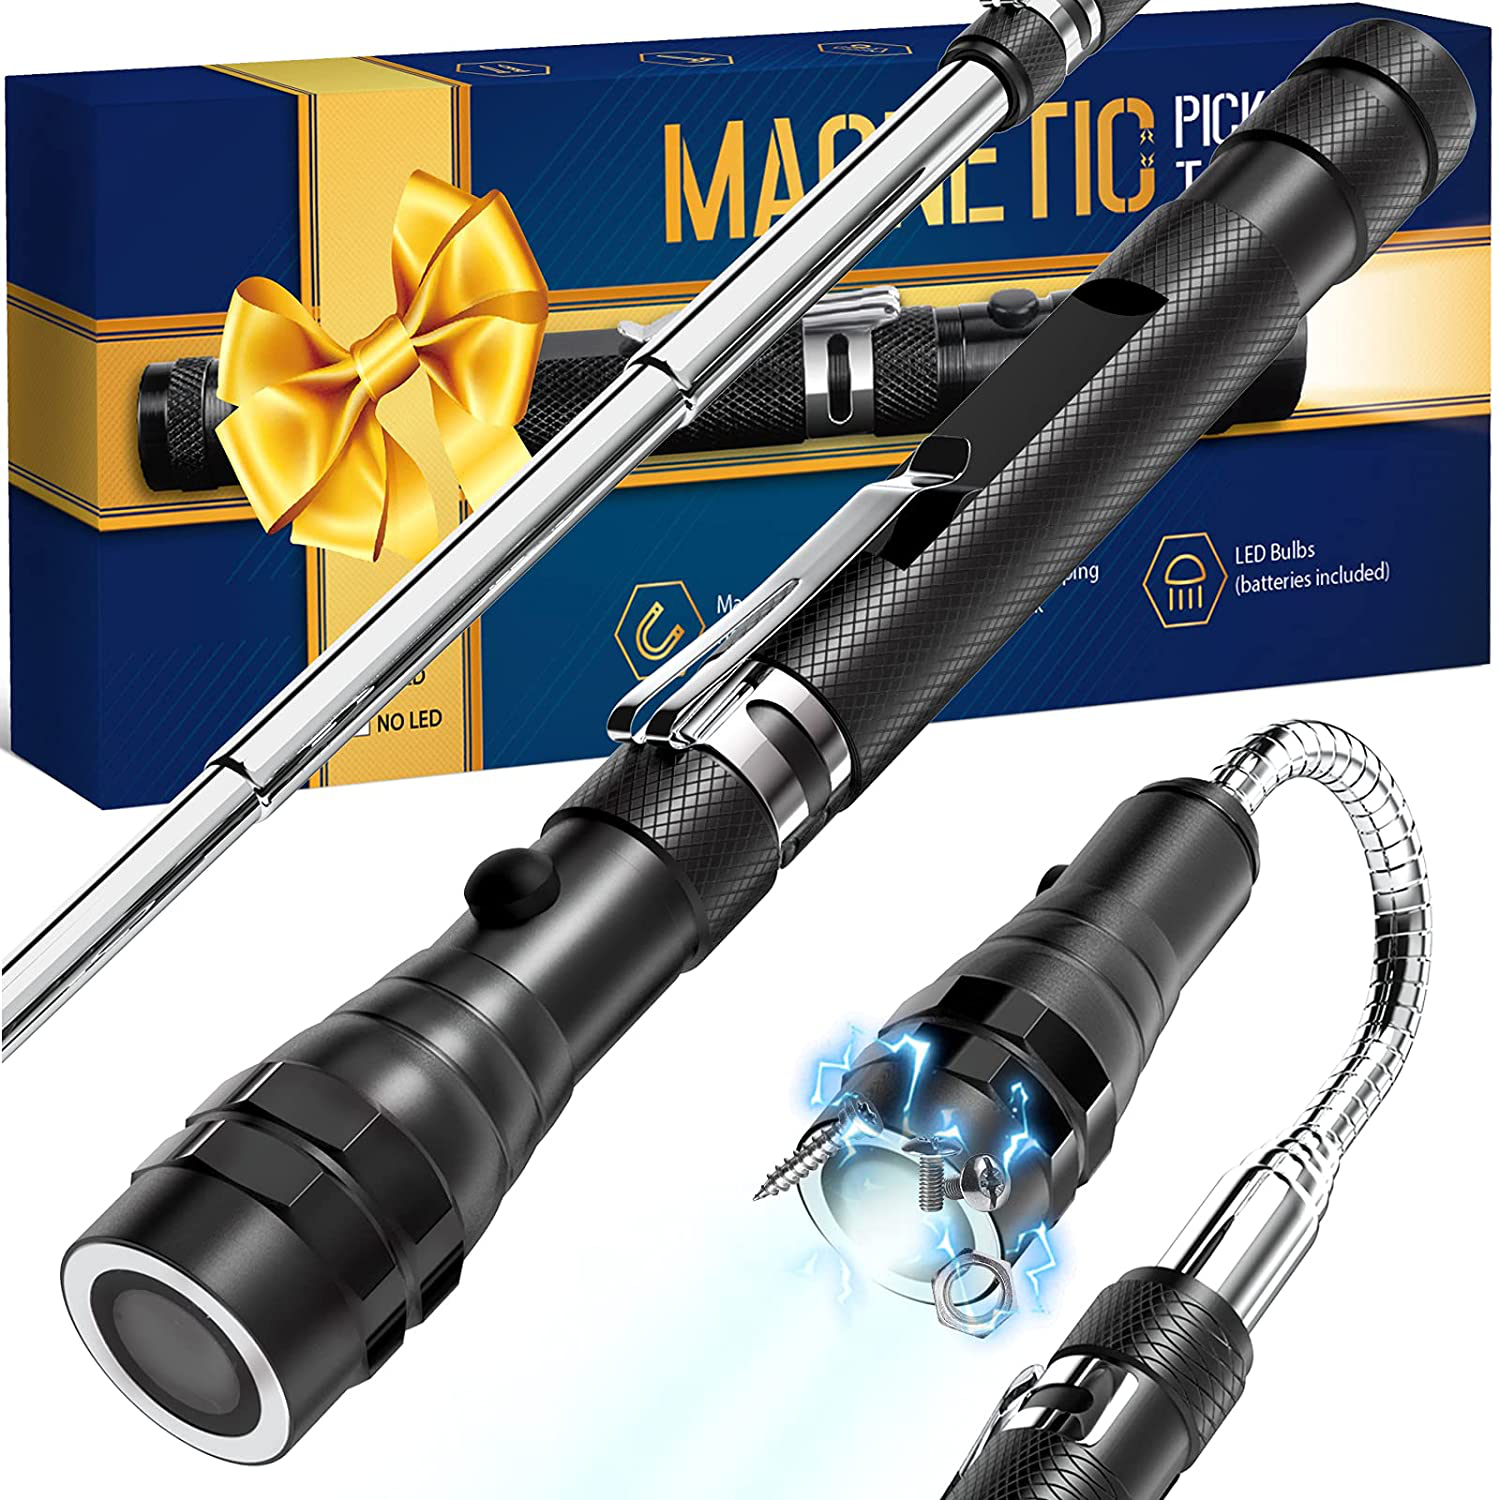 Gifts for Men Dad,Magnet Tool Telescoping Magnetic Pickup Light,22" Extending Magnet Stick Cool Tool Gadget for Men,Unique Birthday Gift for Men HIM,HER,Husband,Grandpa,Stuff for Hard to Reach Place